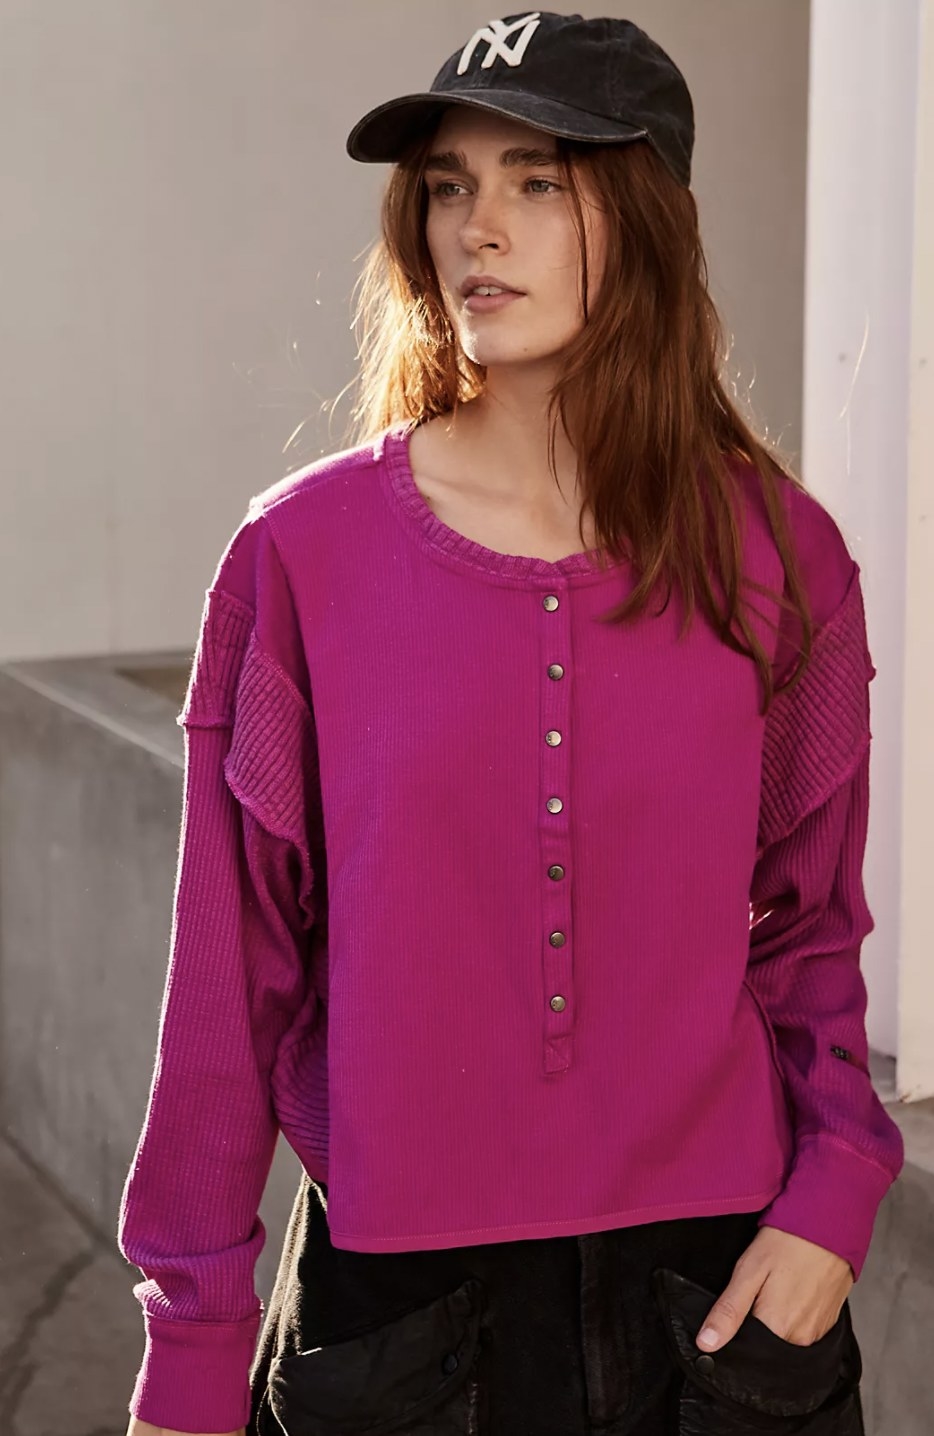 Model wearing the pink button-up henley top